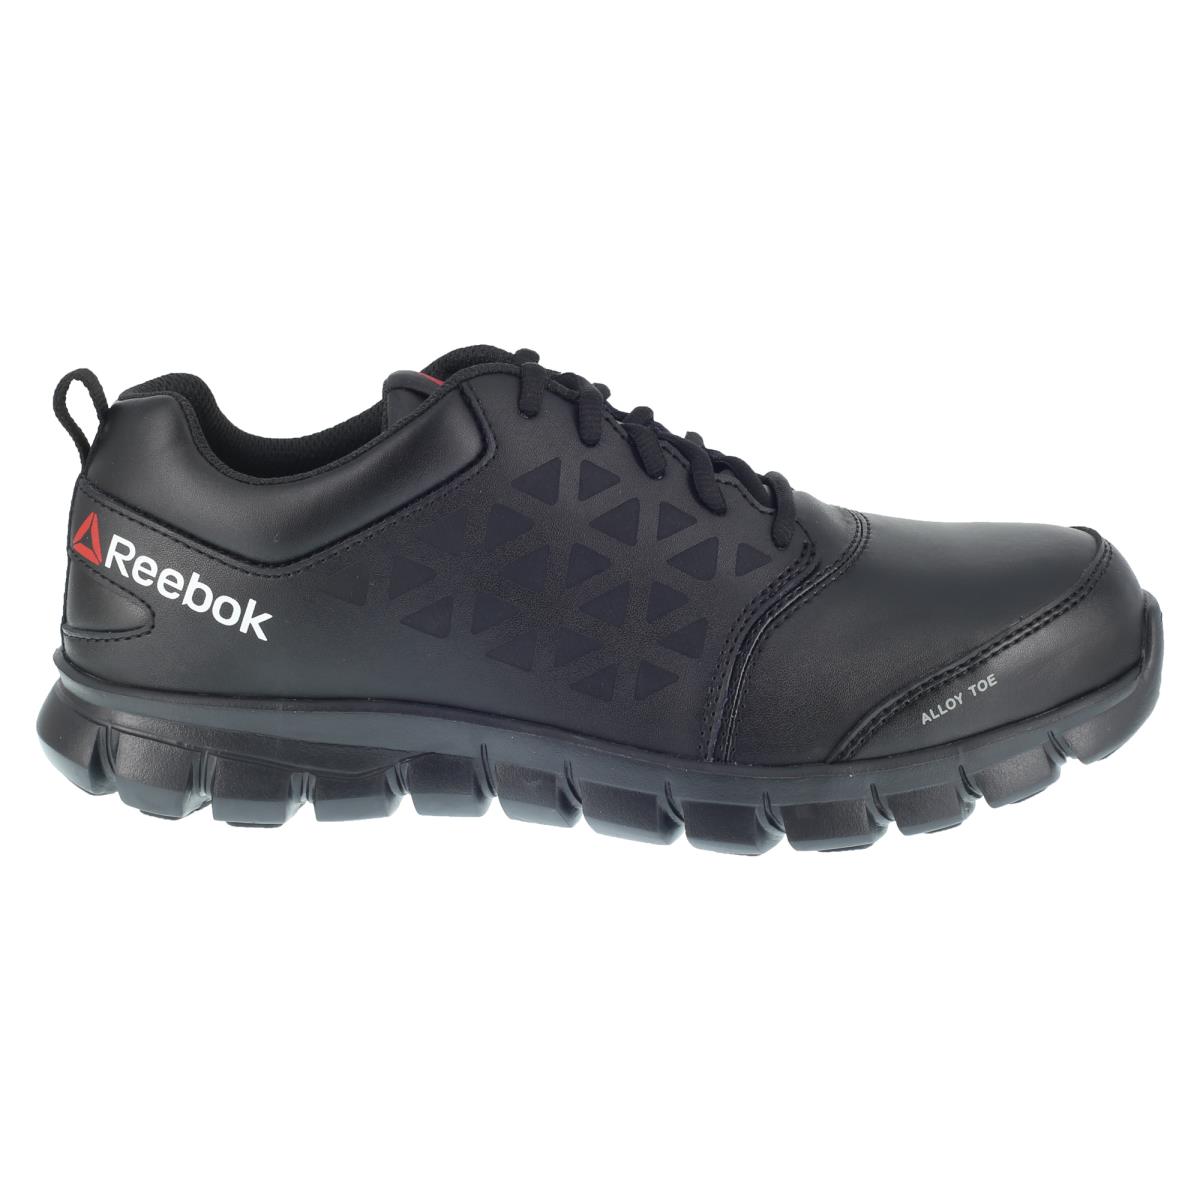 Reebok Womens Black Leather Work Shoes Sublite Oxford M